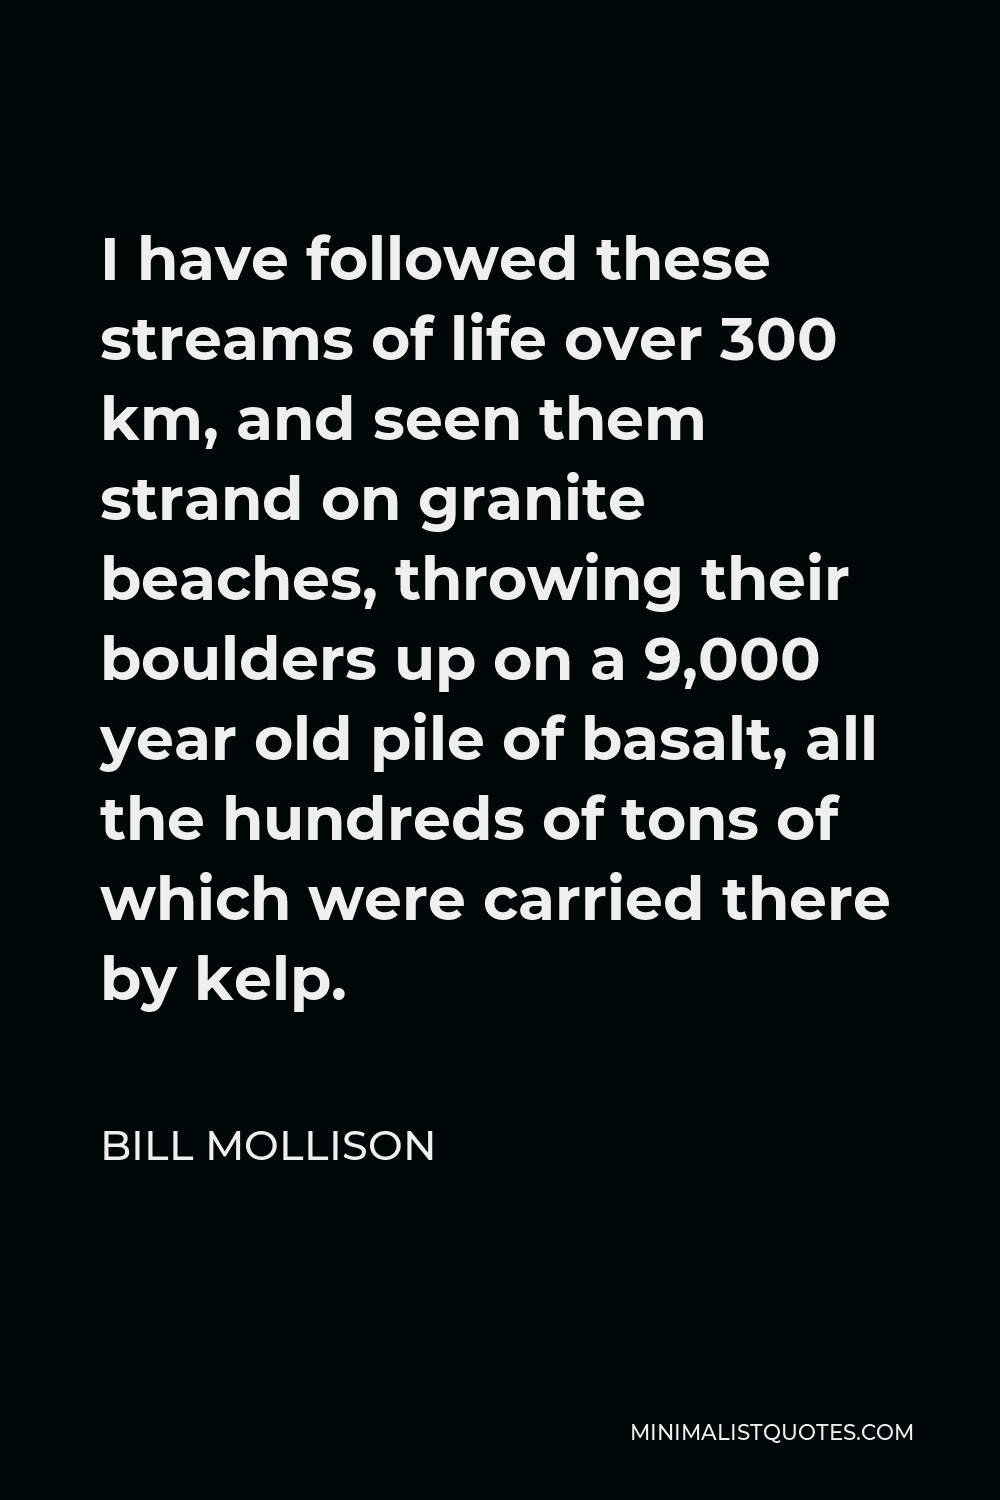 Bill Mollison Quote - I have followed these streams of life over 300 km, and seen them strand on granite beaches, throwing their boulders up on a 9,000 year old pile of basalt, all the hundreds of tons of which were carried there by kelp.